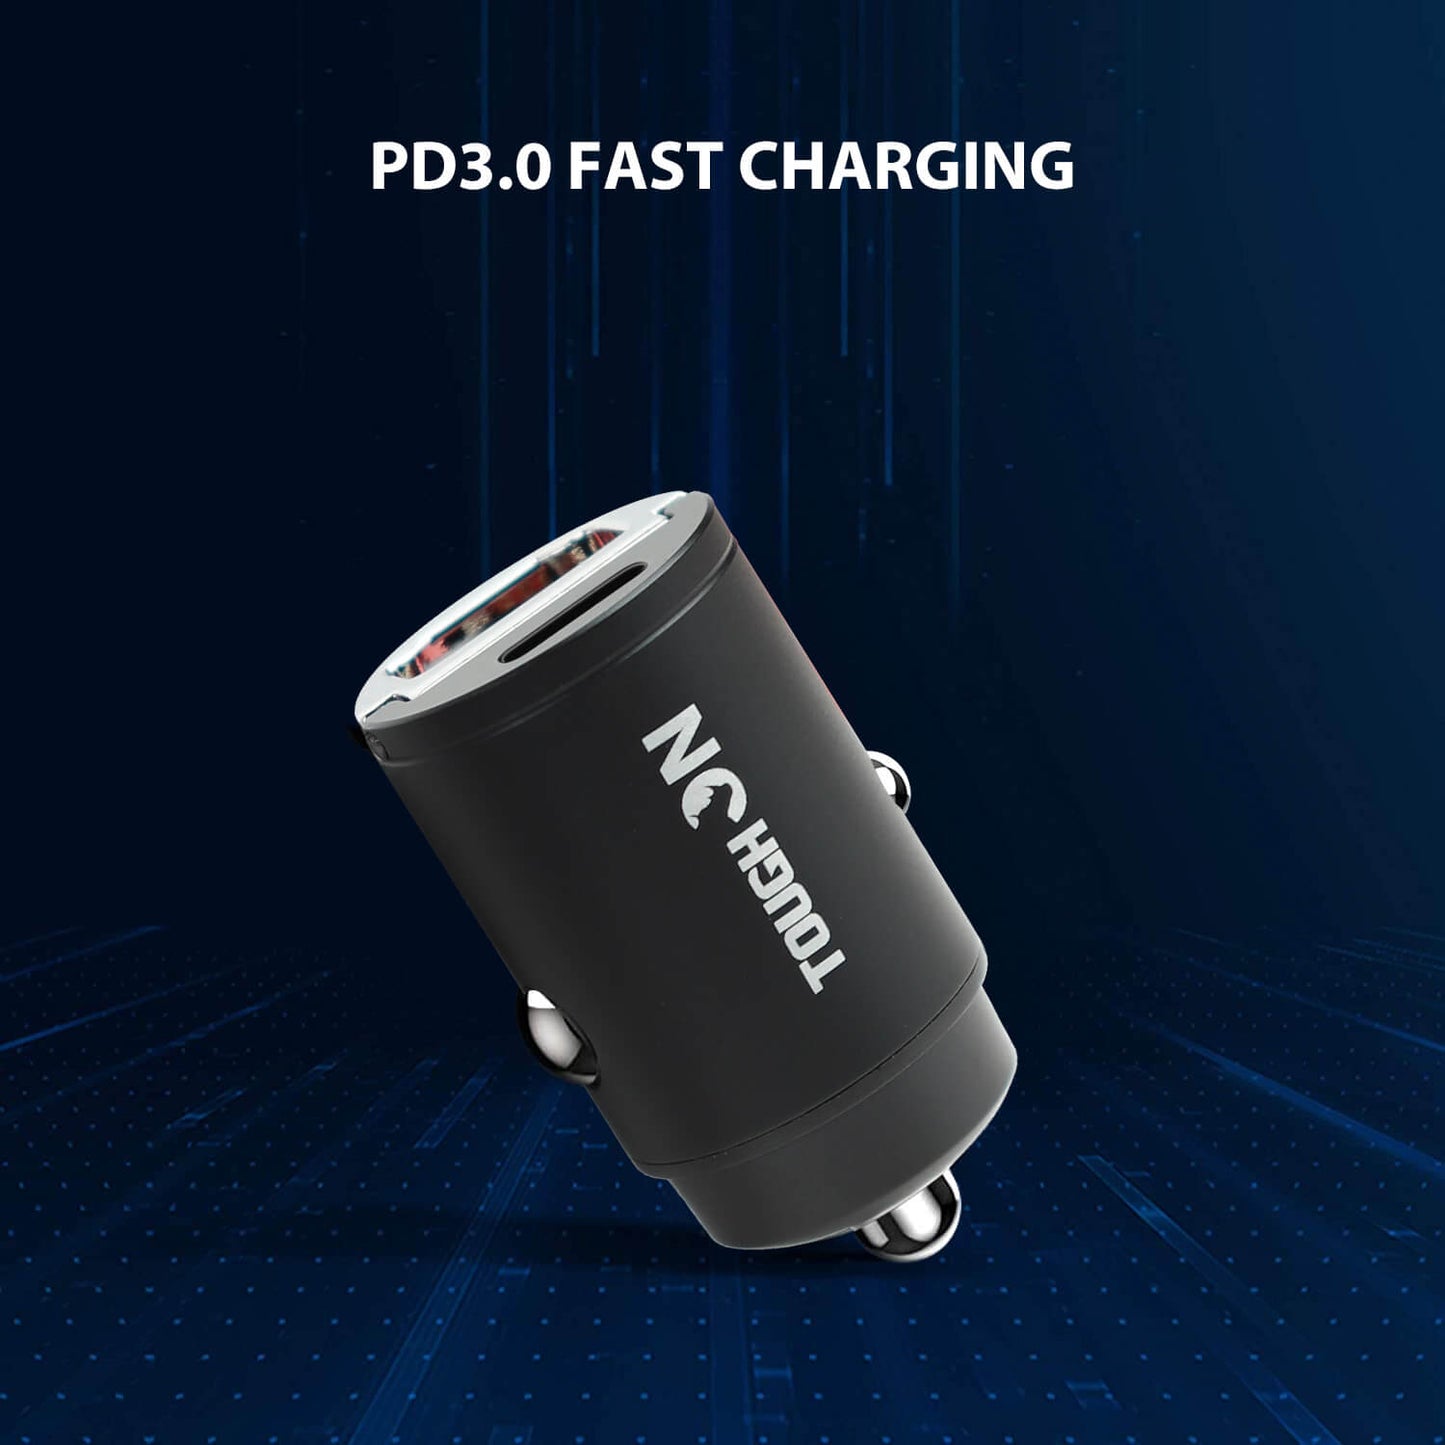 Tough On Power 30W Dual Port Car Charger with PD 3.0